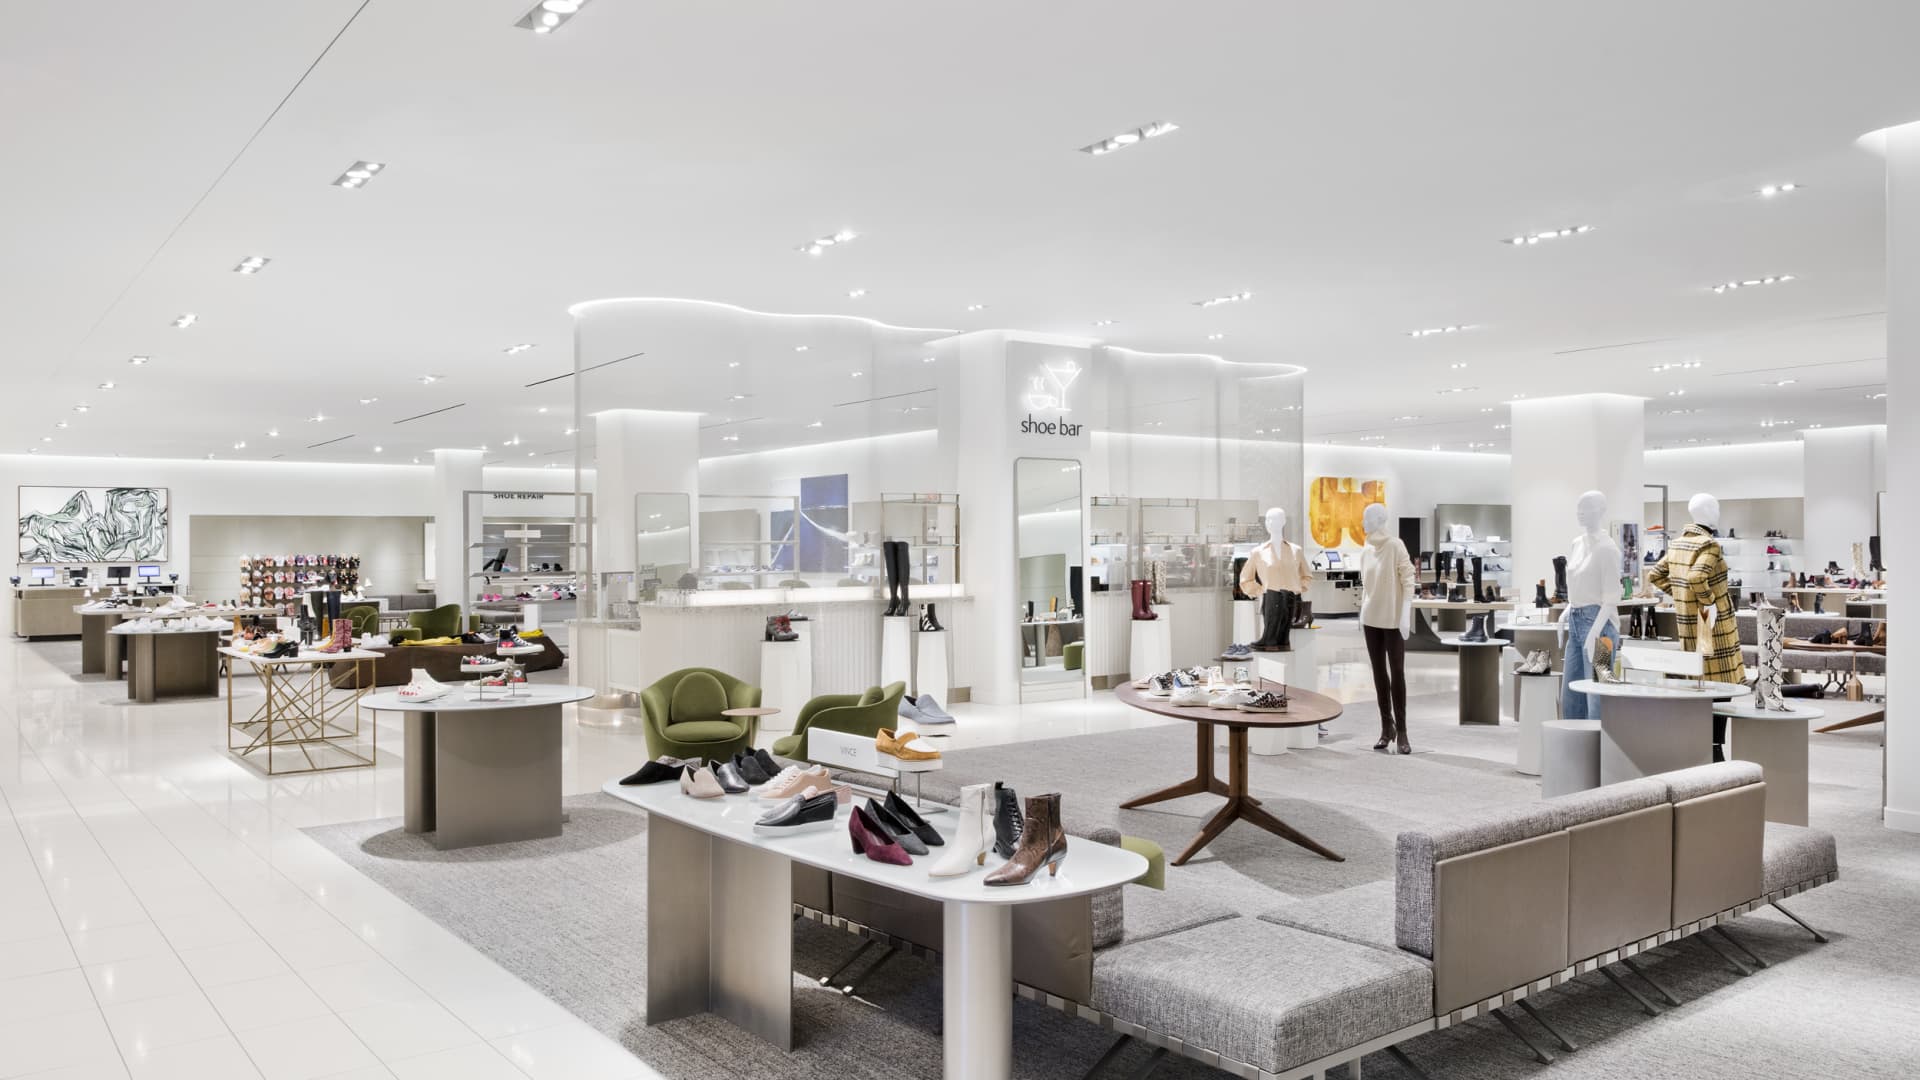 Nordstrom NYC Flagship Store Opening With Food Options, 7 Floors